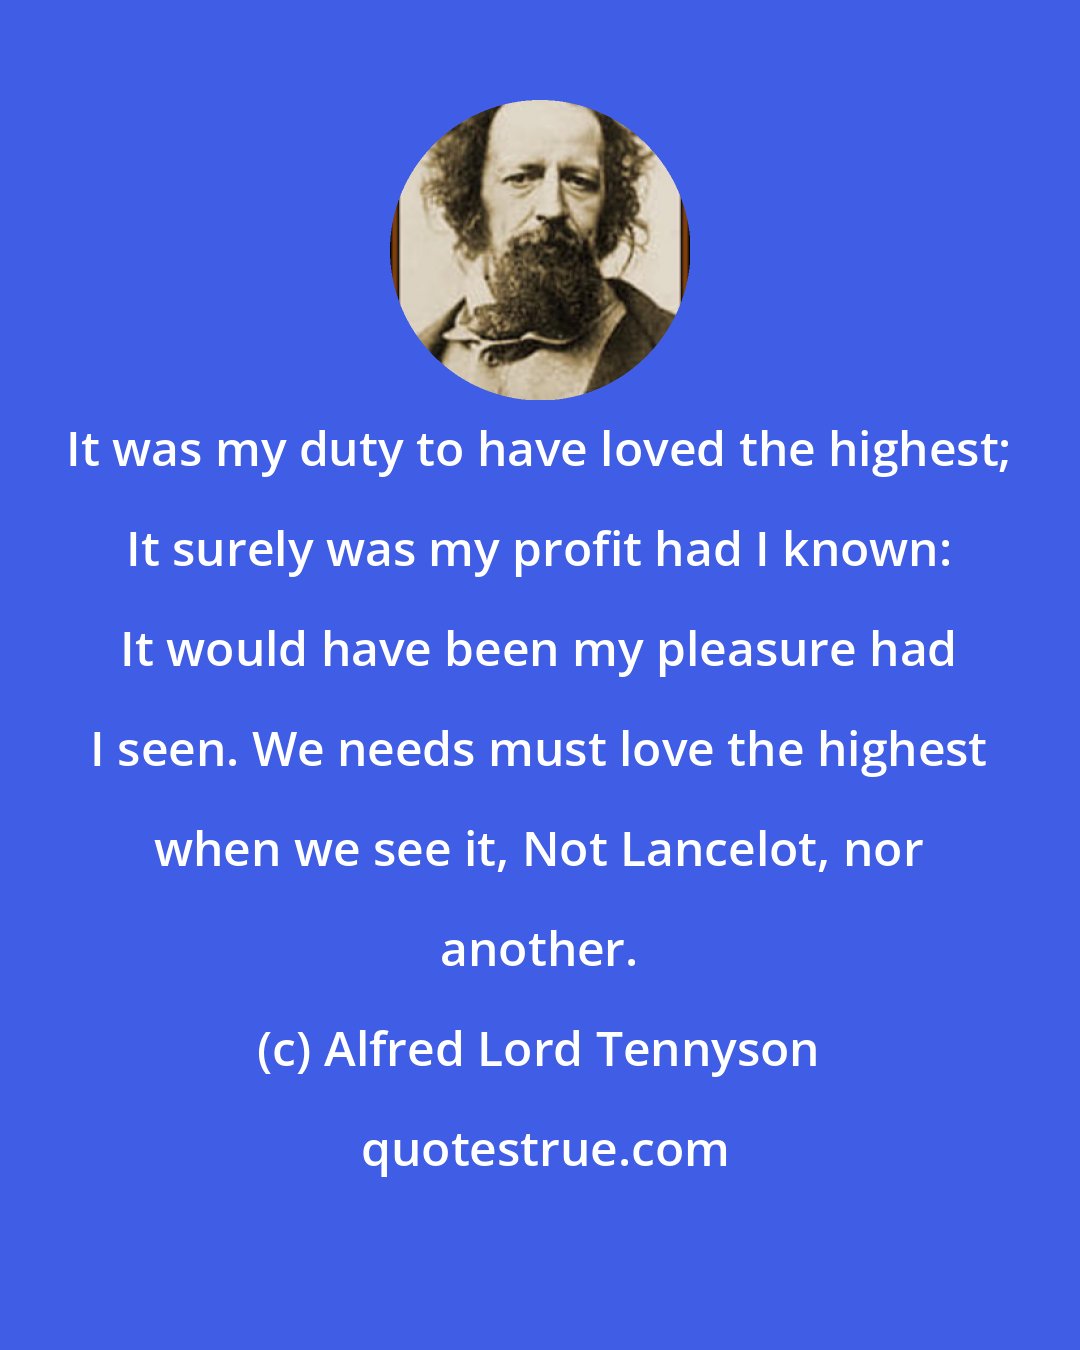 Alfred Lord Tennyson: It was my duty to have loved the highest; It surely was my profit had I known: It would have been my pleasure had I seen. We needs must love the highest when we see it, Not Lancelot, nor another.